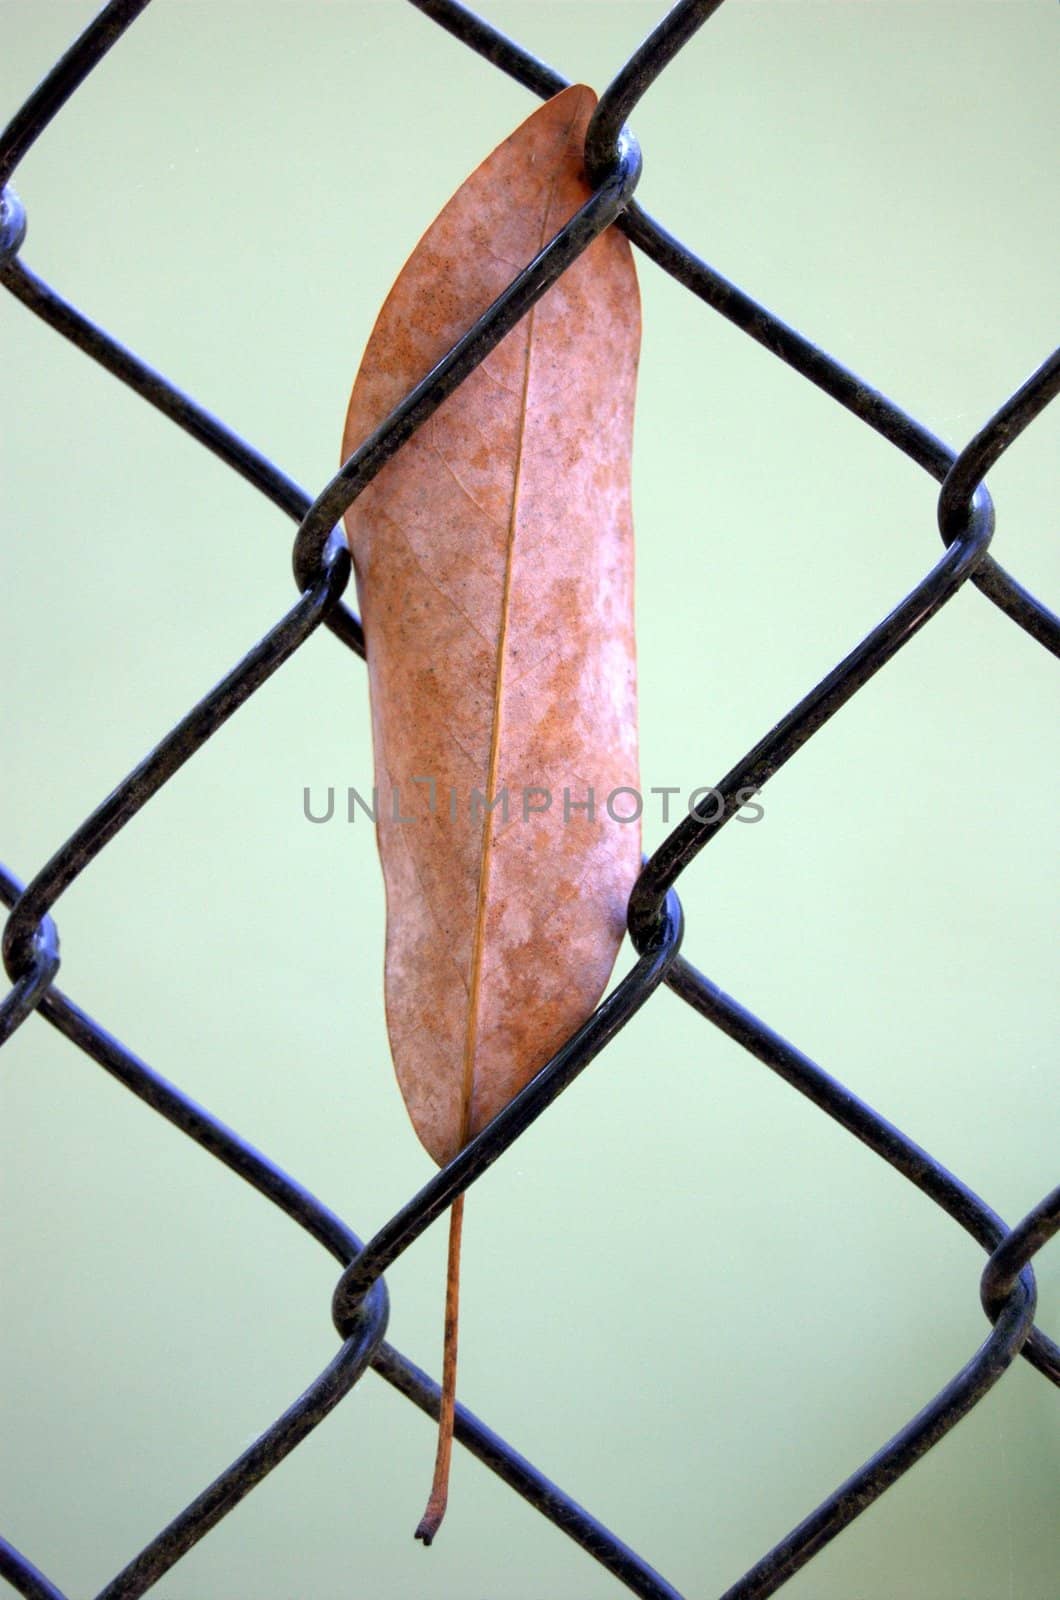 Leaf stuck in a chain link fence